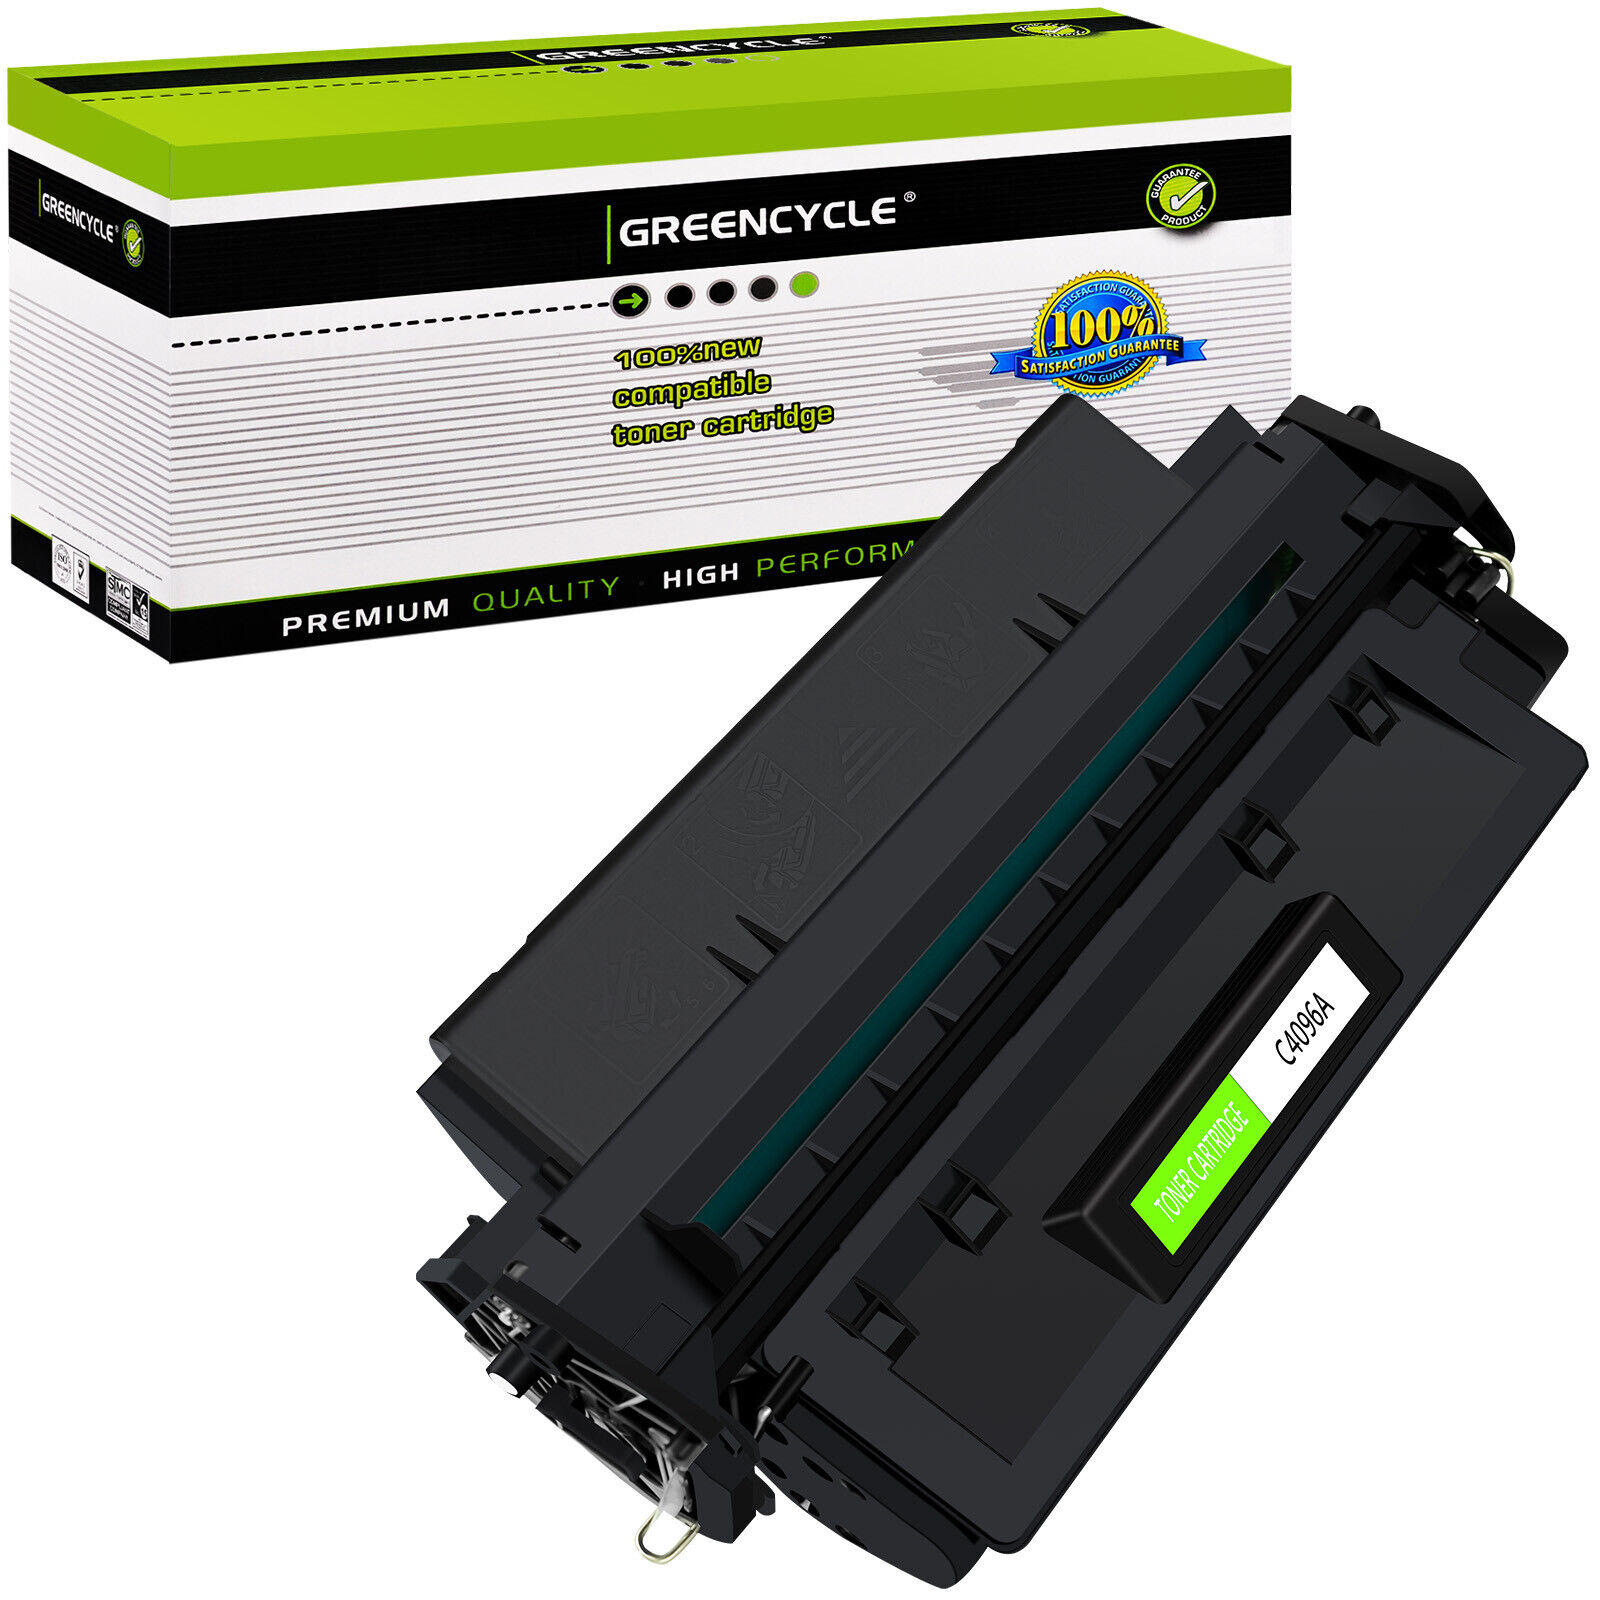 GREENCYCLE C4096A 96A Black Toner Cartridge For HP LaserJet 2100m 2100xi 2200dtn